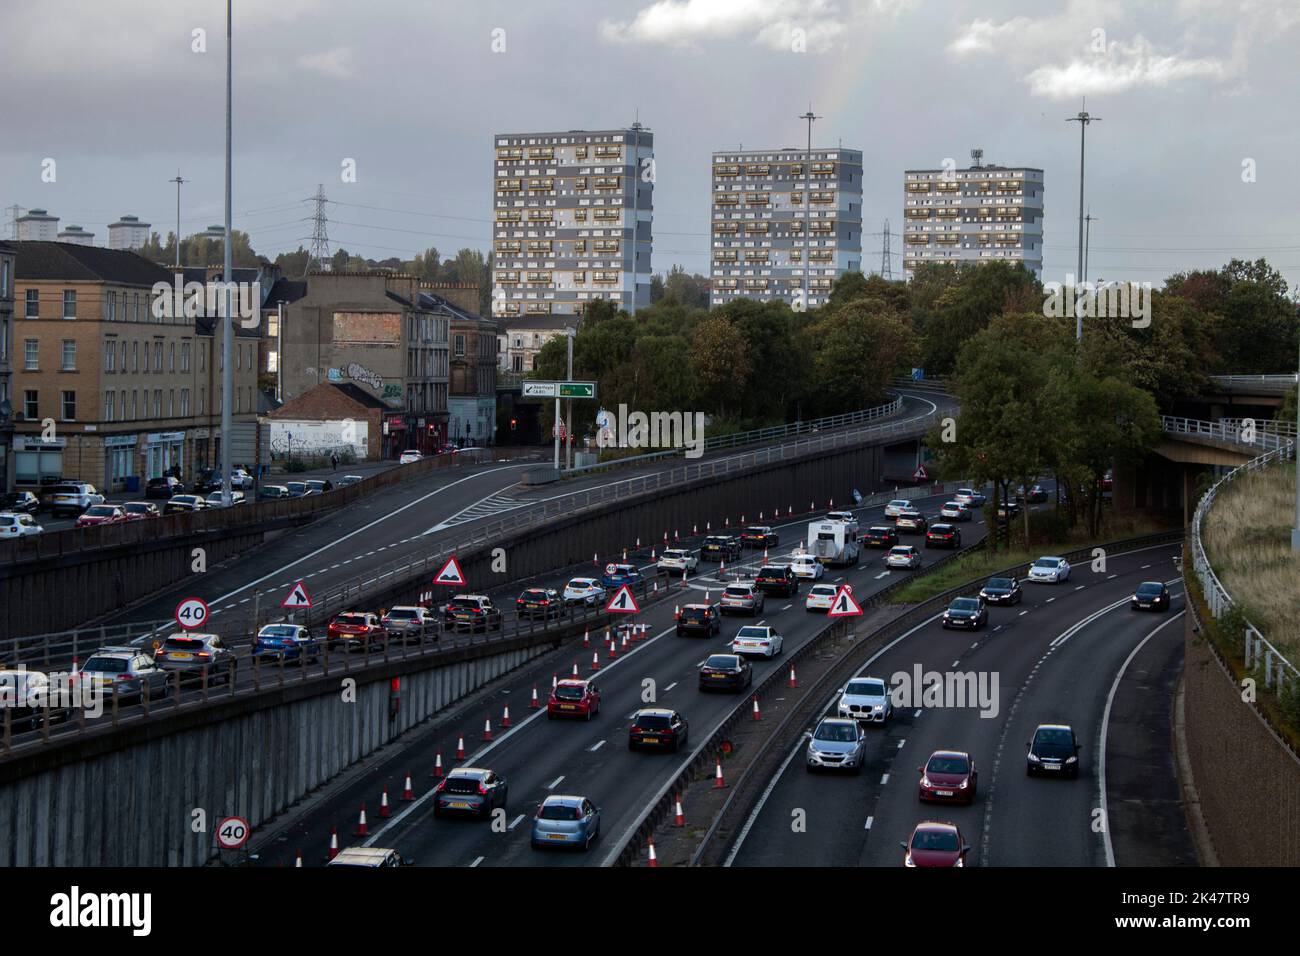 View of the A804 from the pedestrian bridge with the sixties tower blocks of the Woodside area of Glasgow in the background, Scotland, UK Stock Photo